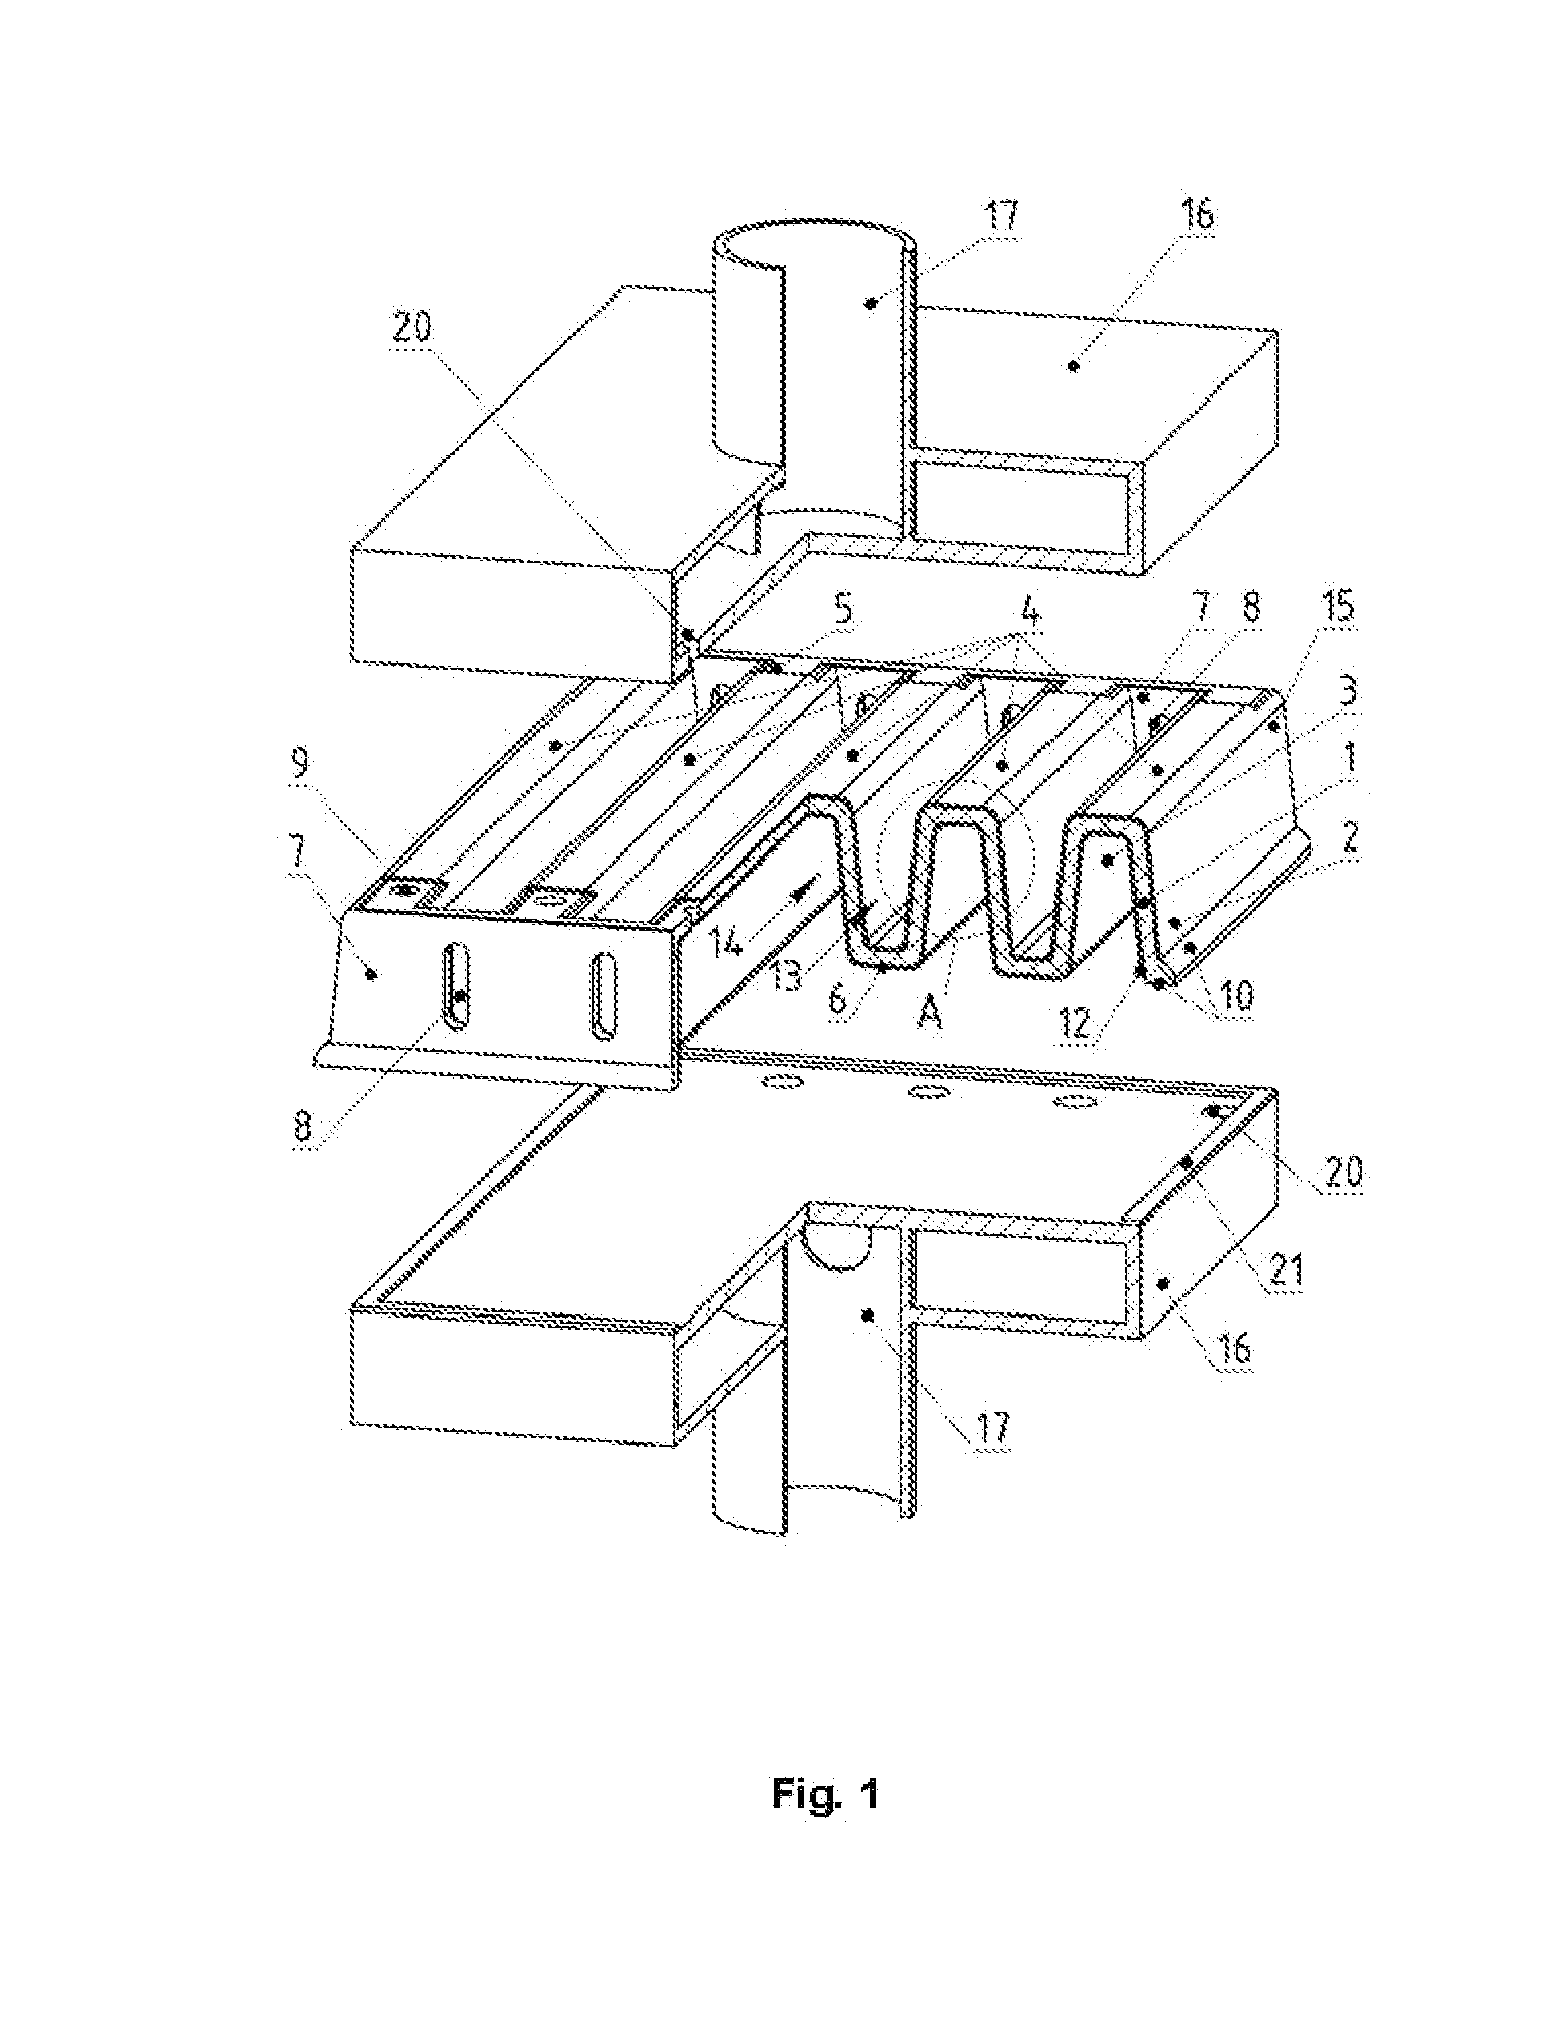 Modified planar cell (MPC) and electrochemical device battery (stack) based on MPC, manufacturing method for planar cell and battery, and planar cell embodiments